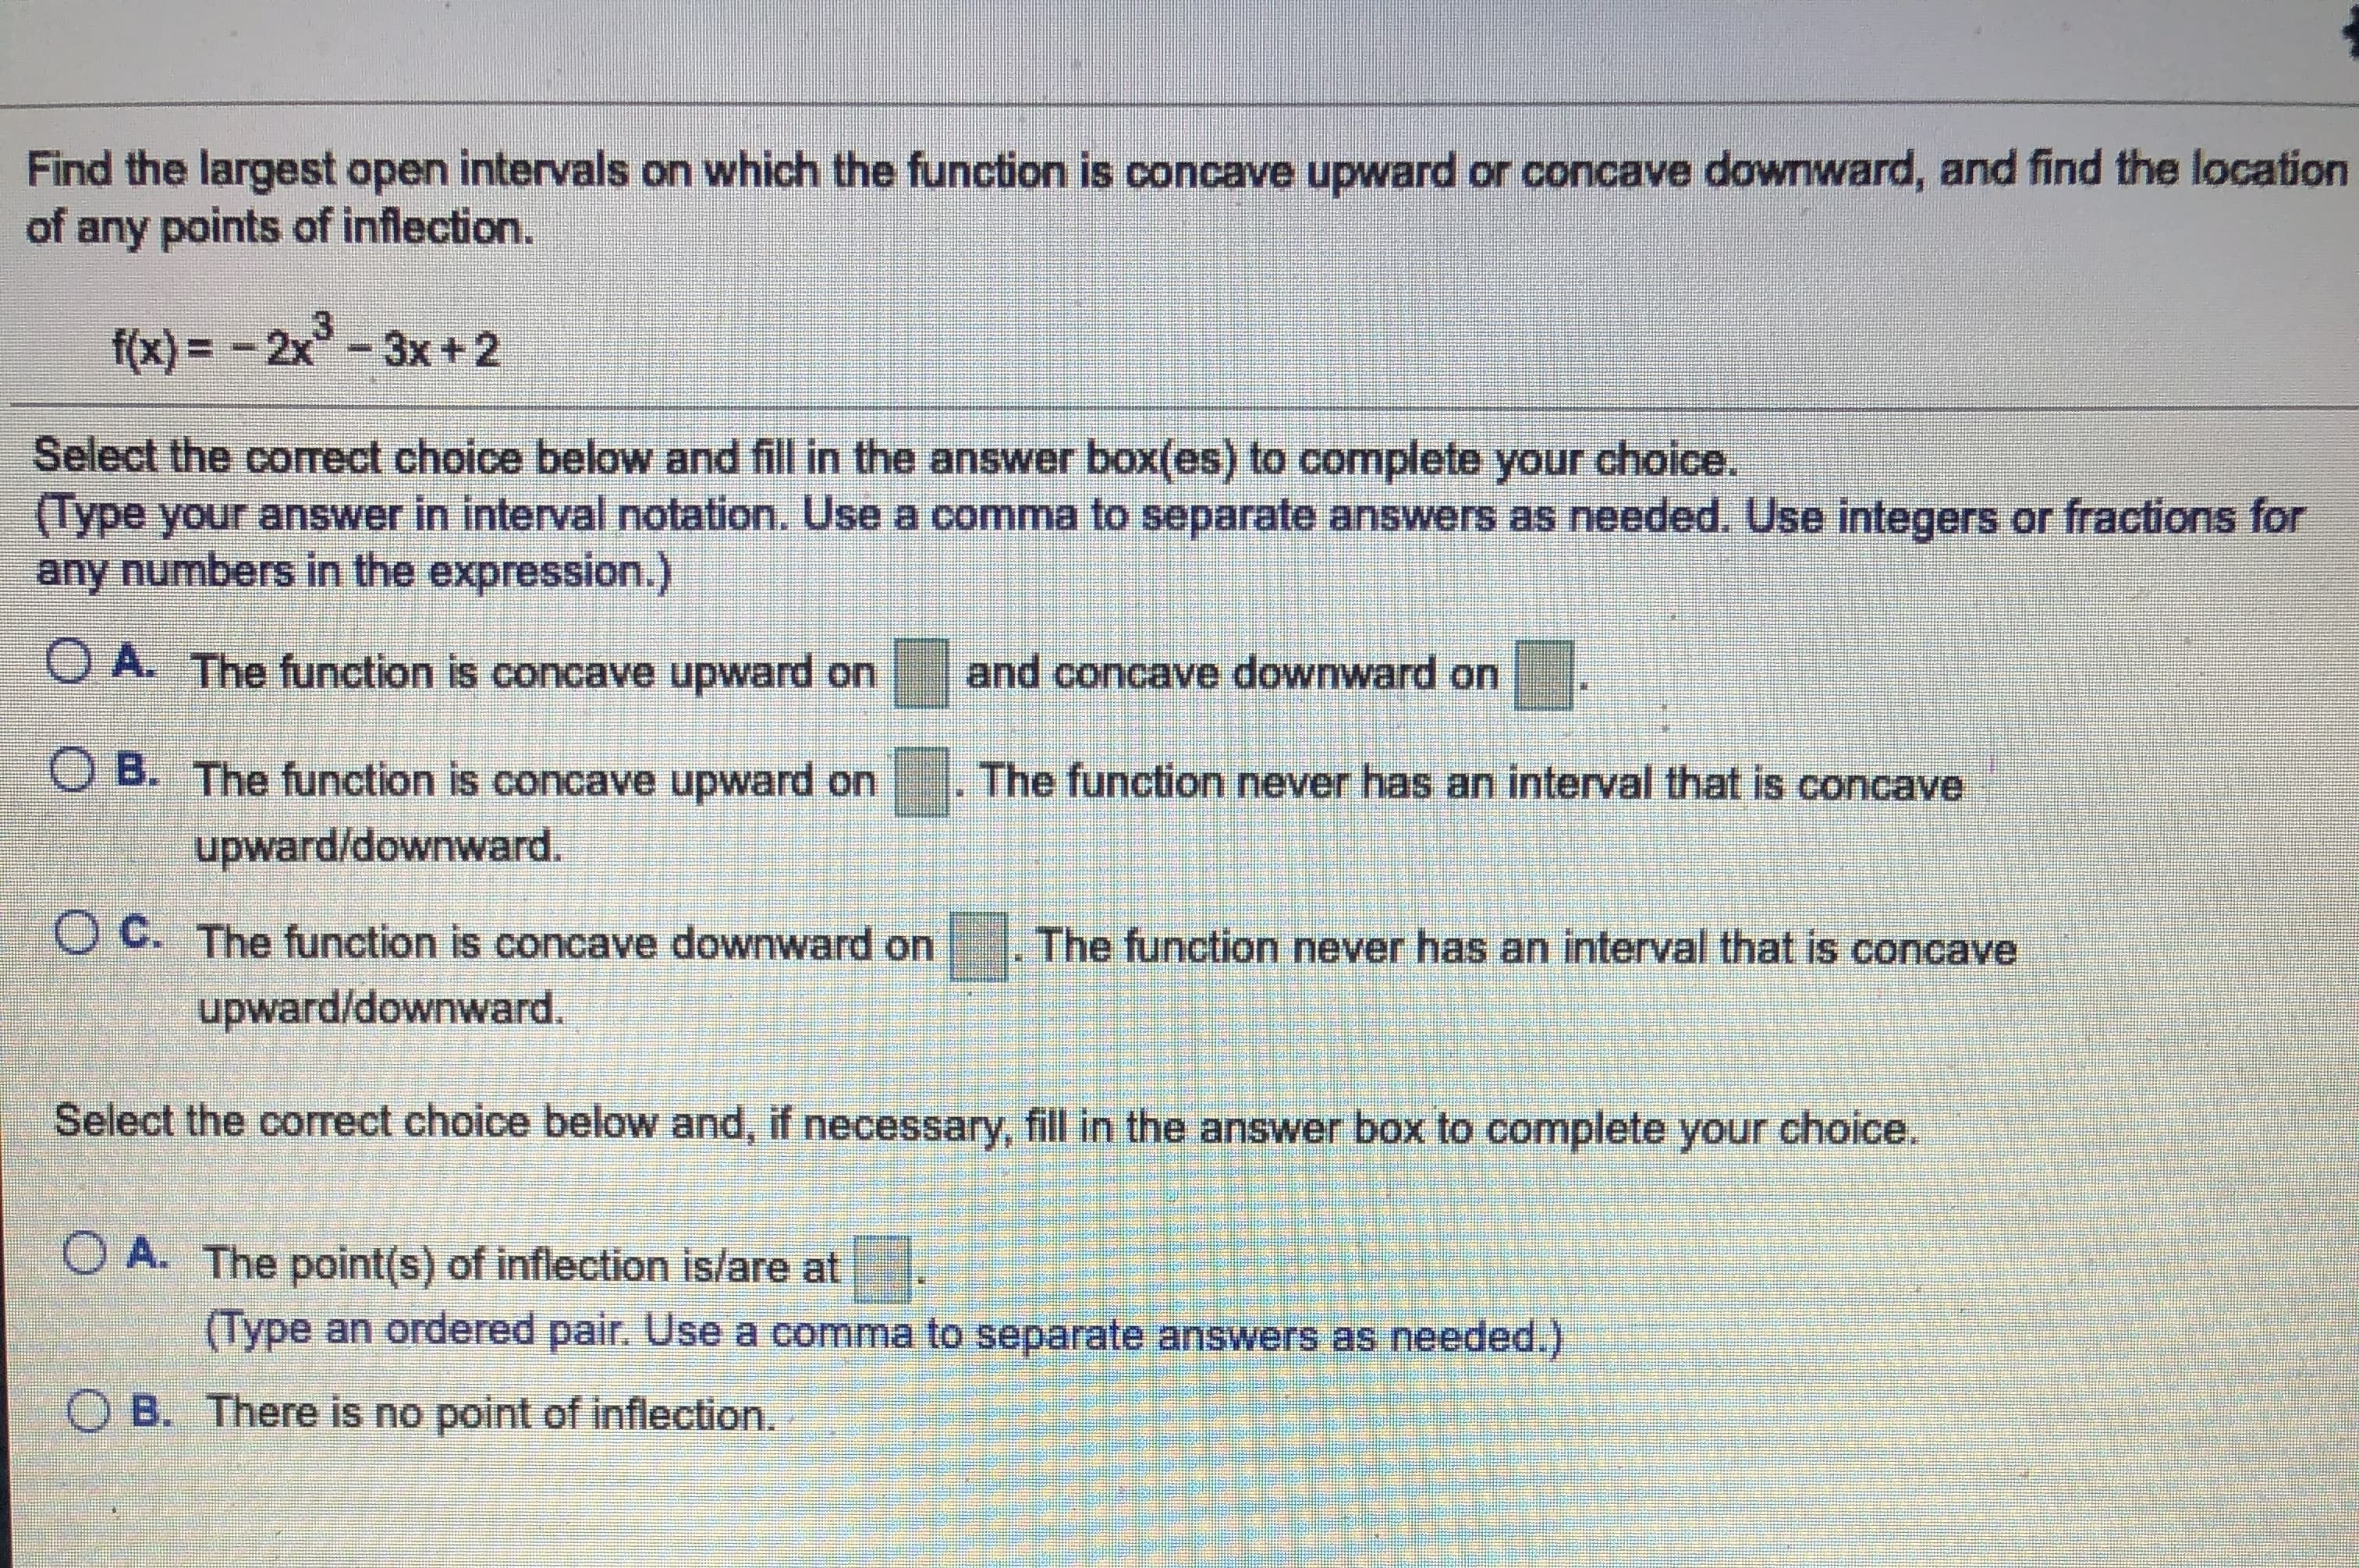 Find the largest open intervals on which the function is concave upward or concave downward, and find the location
of any points of inflection.
f(x) = - 2x-
3x +2
Select the corect choice below and fill in the answer box(es) to complete your choice.
(Type your answer in interval notation. Use a comma to separate answers as needed. Use integers or fractions for
any numbers in the expression.)
O A. The function is concave upward on
and concave downward on
O B. The function is concave upward on . The function never has an interval that is concave
upward/downward.
O C. The function is concave downward on
The function never has an interval that is concave
upward/downward.
Select the correct choice below and, if necessary, fill in the answer box to complete your choice.
O A. The point(s) of inflection is/are at
(Type an ordered pair. Use a comma to separate answers as needed.)
O B. There is no point of inflection.
